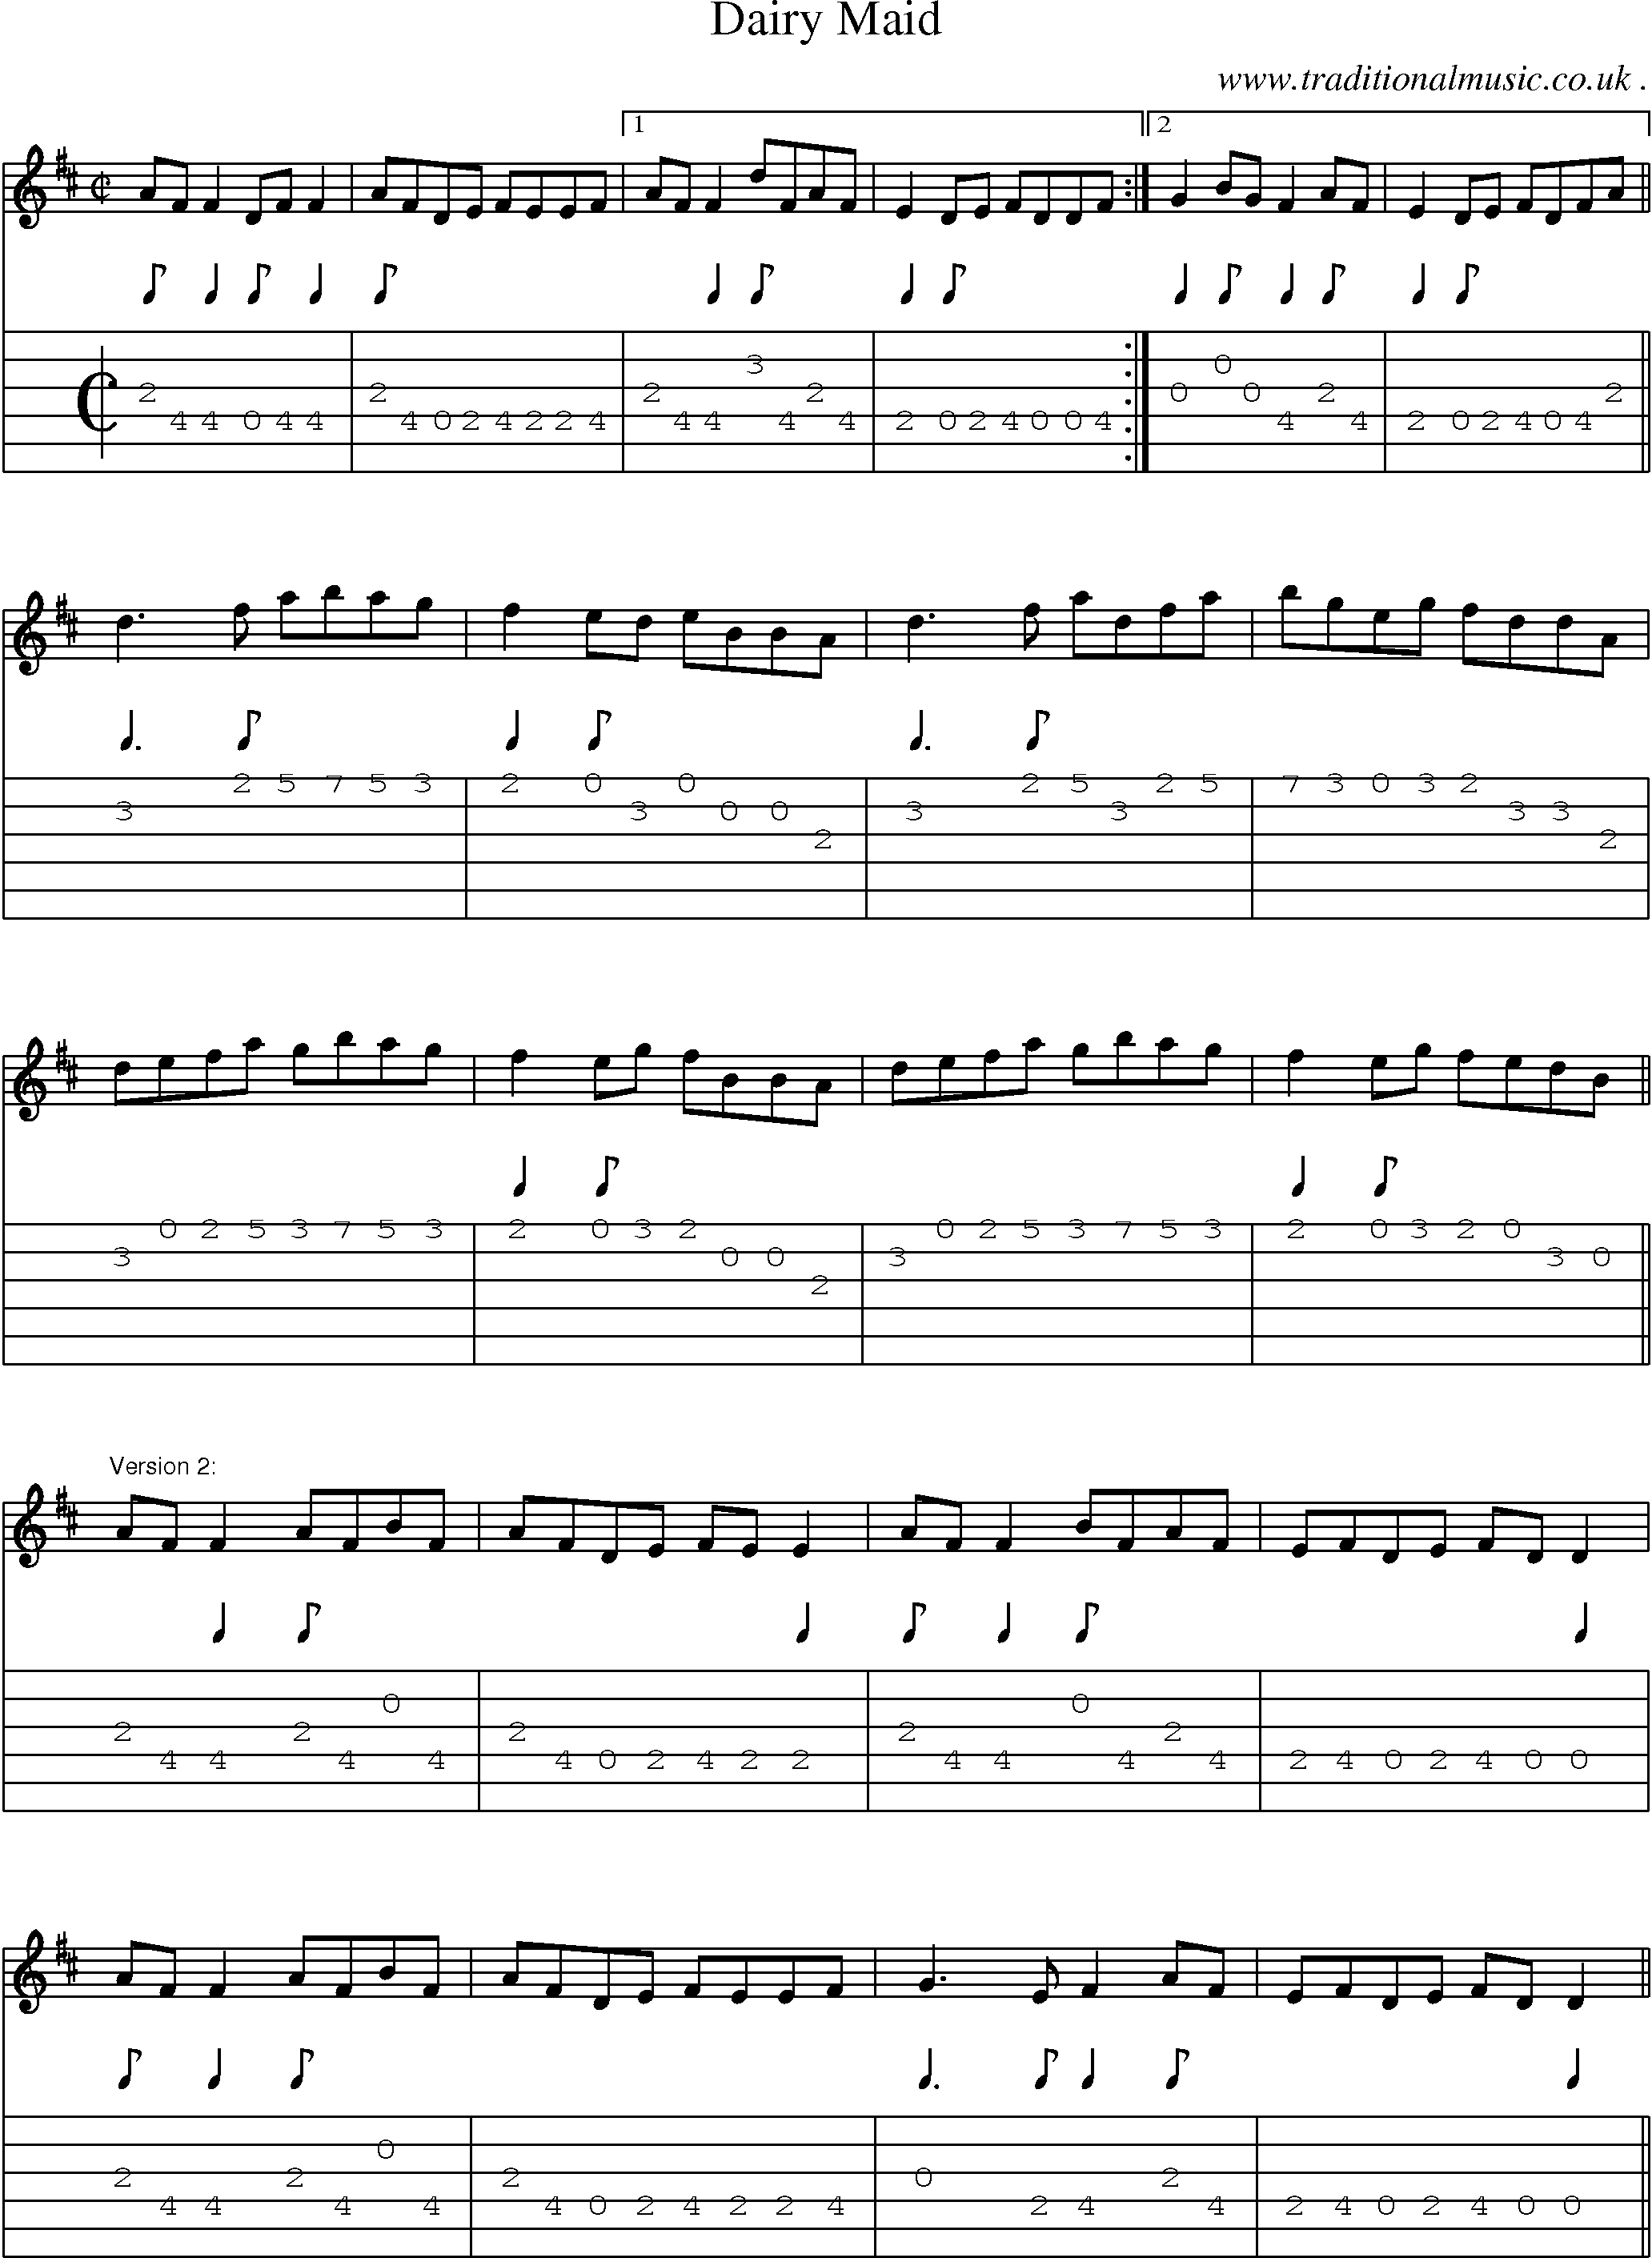 Sheet-Music and Guitar Tabs for Dairy Maid